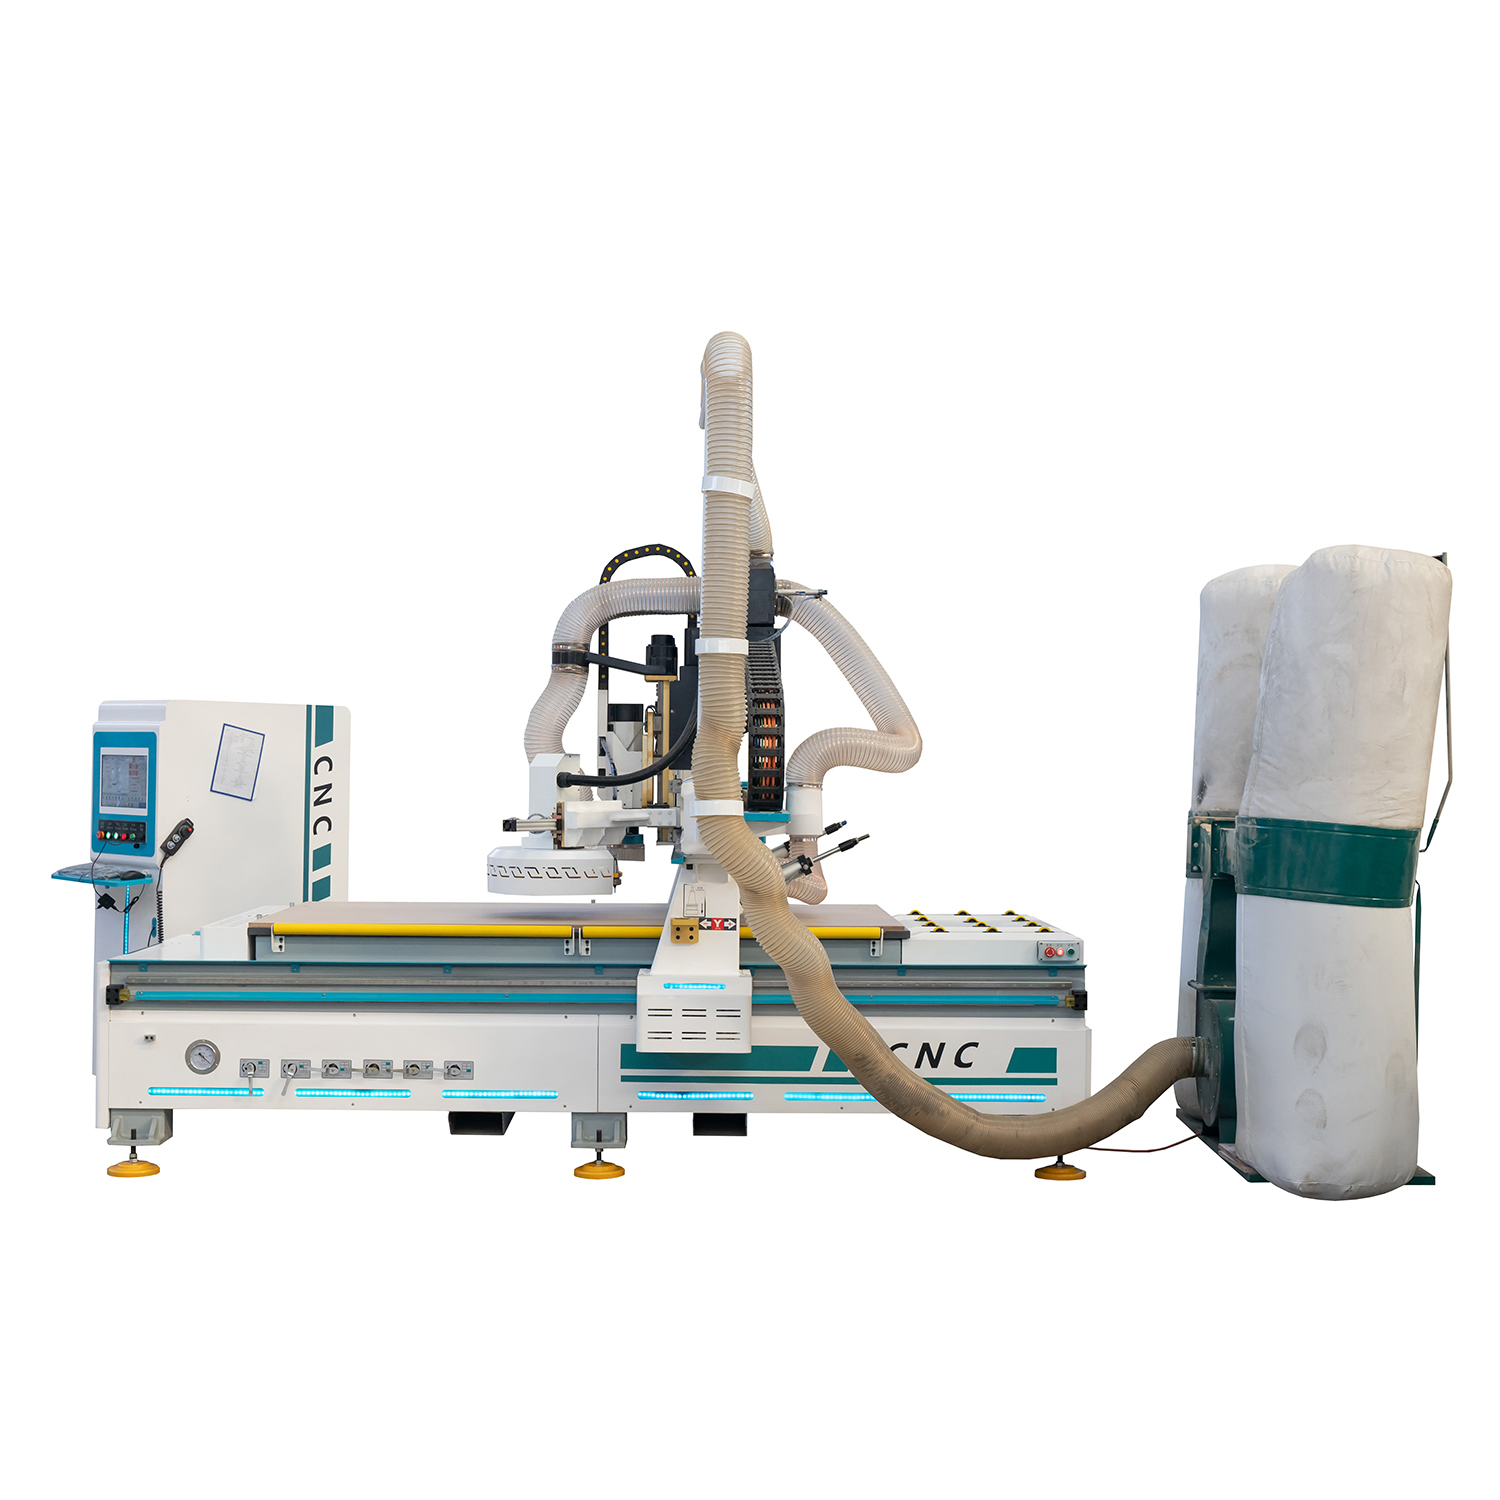 ATC CNC Router with Automatic Tool Changer Spindle 2021 new design Featured Image